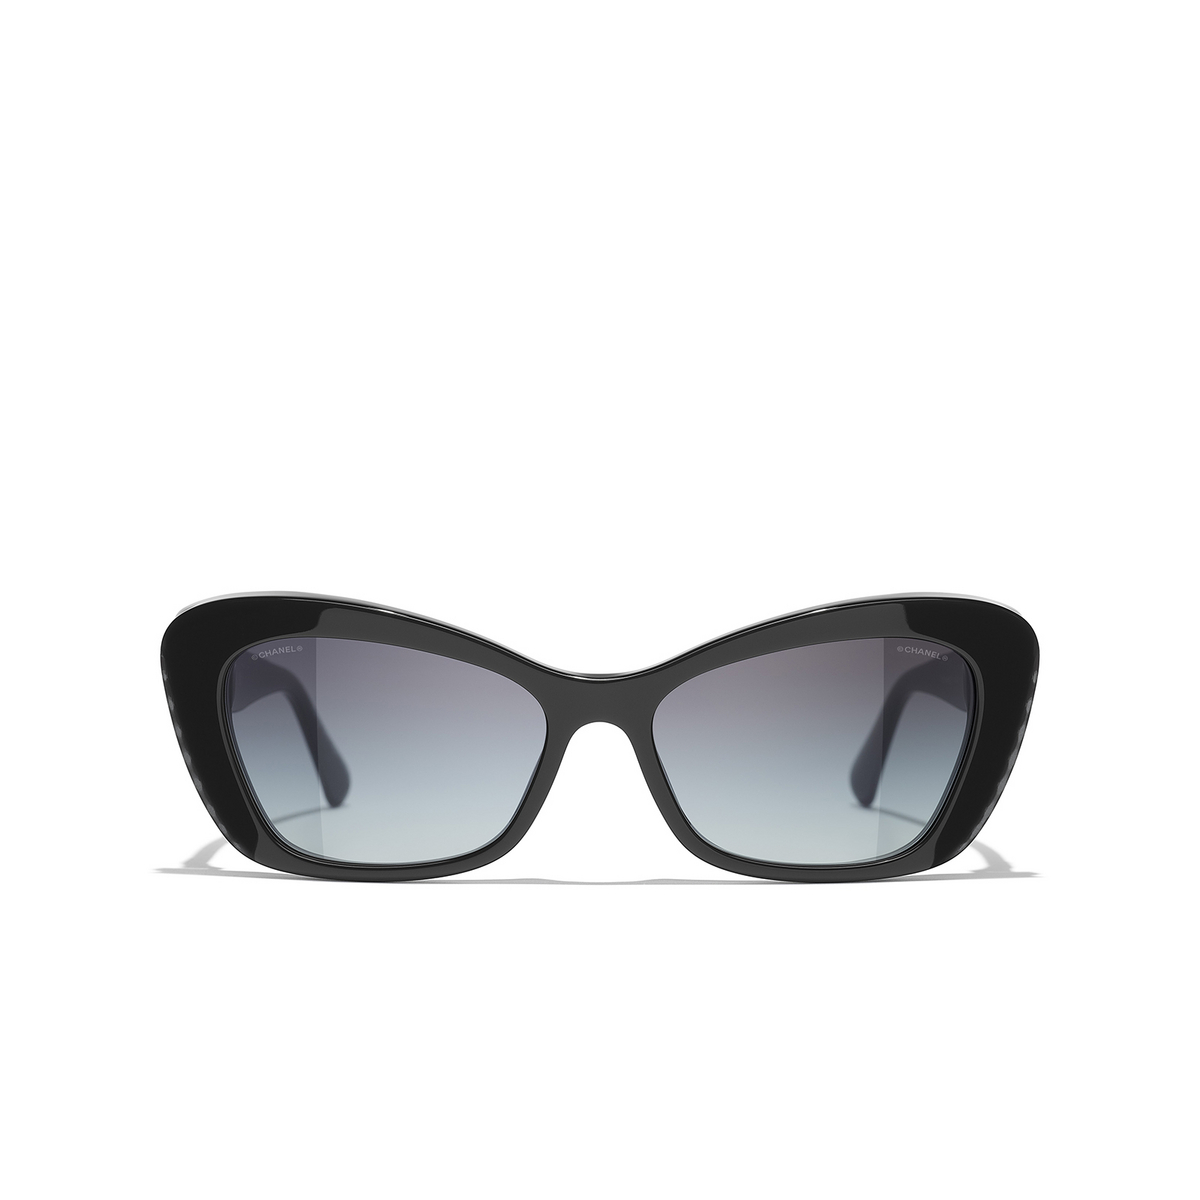 CHANEL cateye Sunglasses 1716S6 Grey - front view